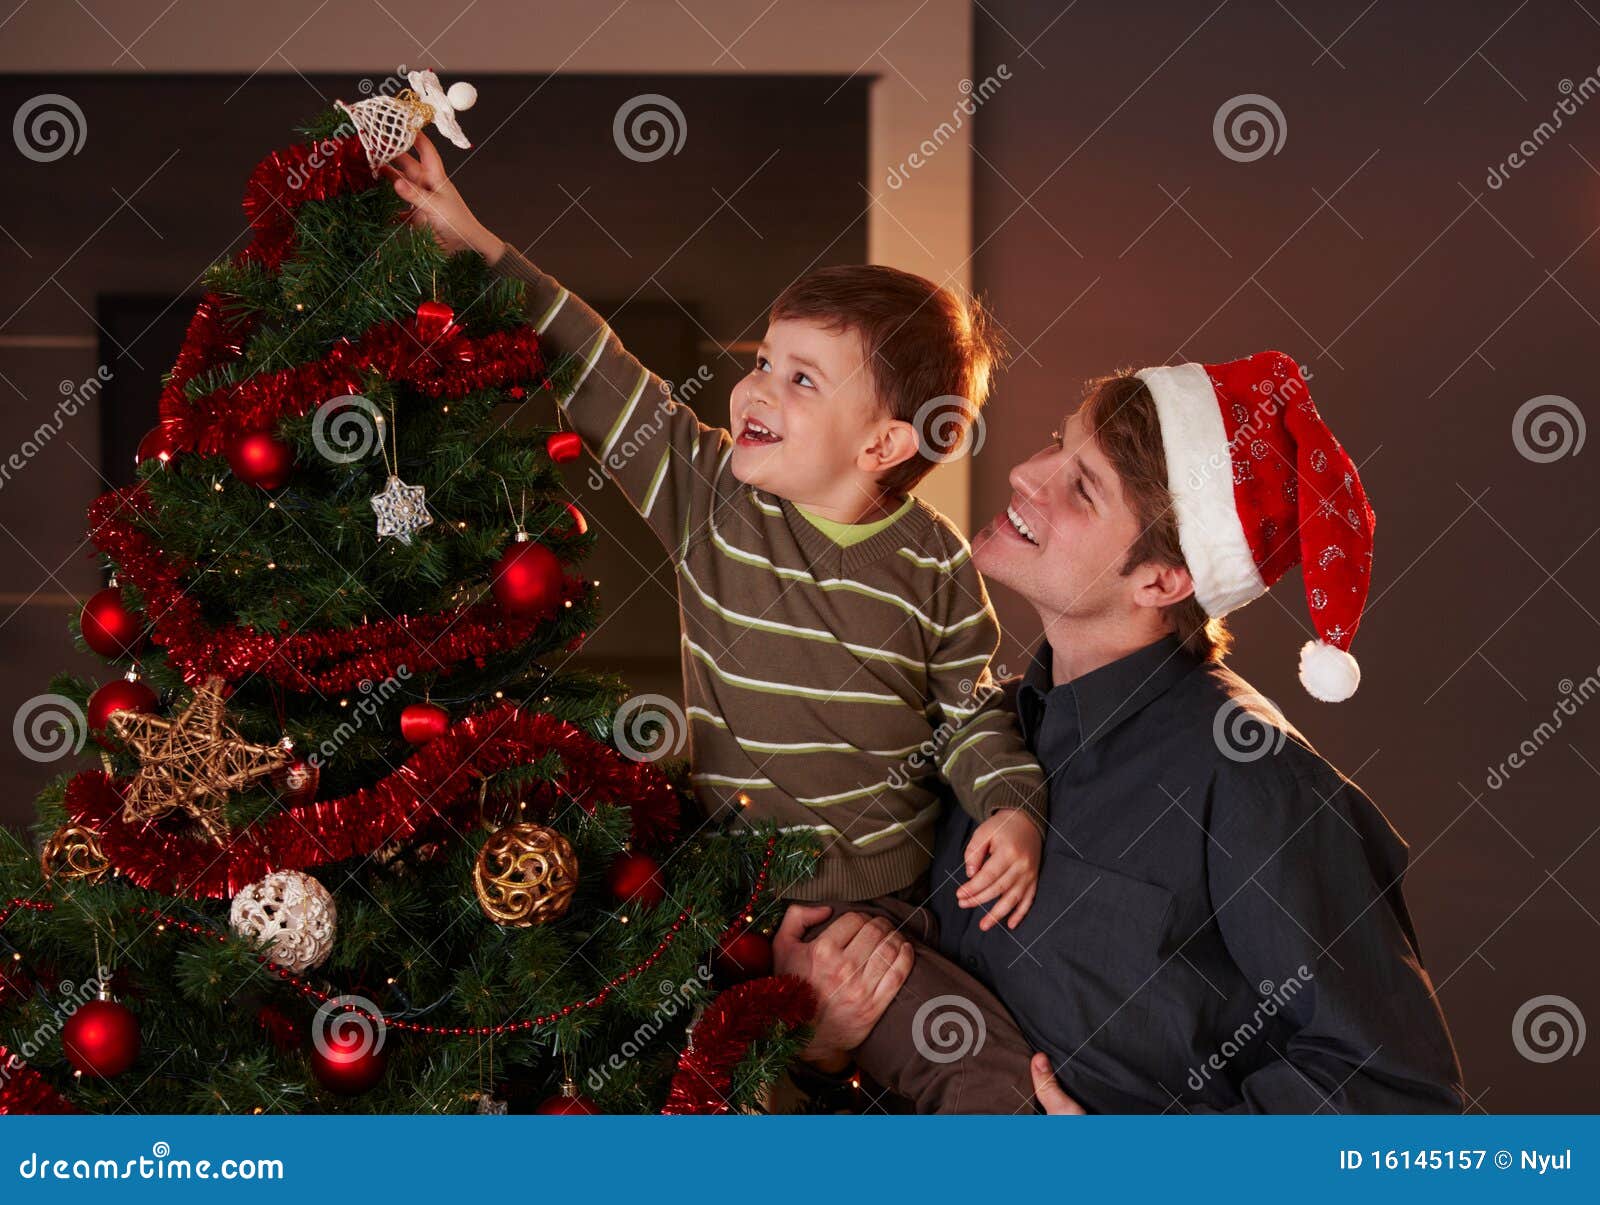 dad helping boy to decorate christmas tree